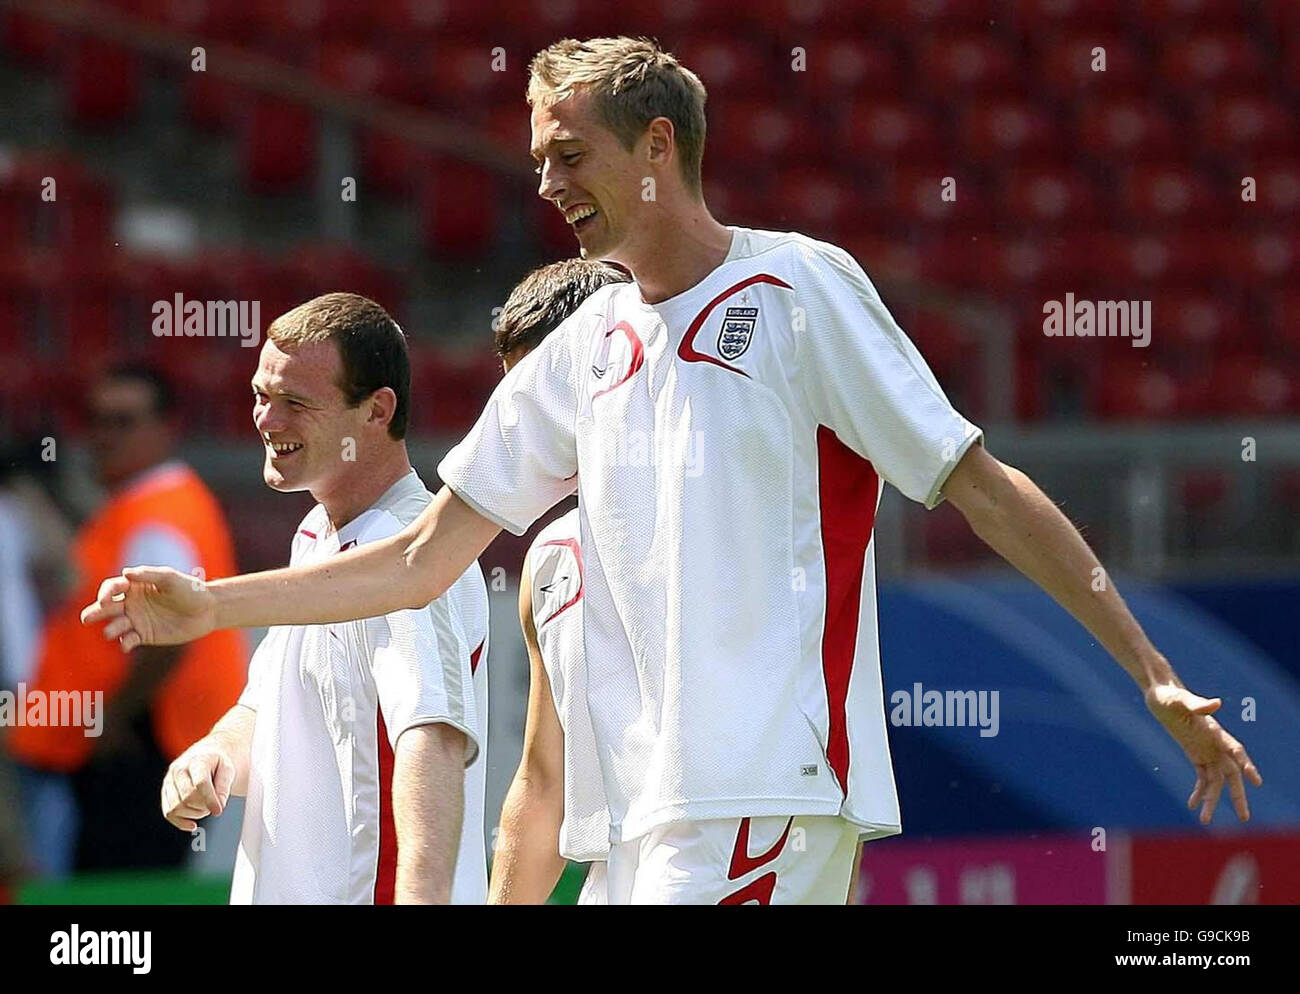 Soccer - 2006 Fifa World Cup - England training Stuttgart - Germany. England's Peter Crouch and Wayne Rooney (left) during a training session at the Gottlieb Daimler Stadion, Stuttgart, Germany. Stock Photo